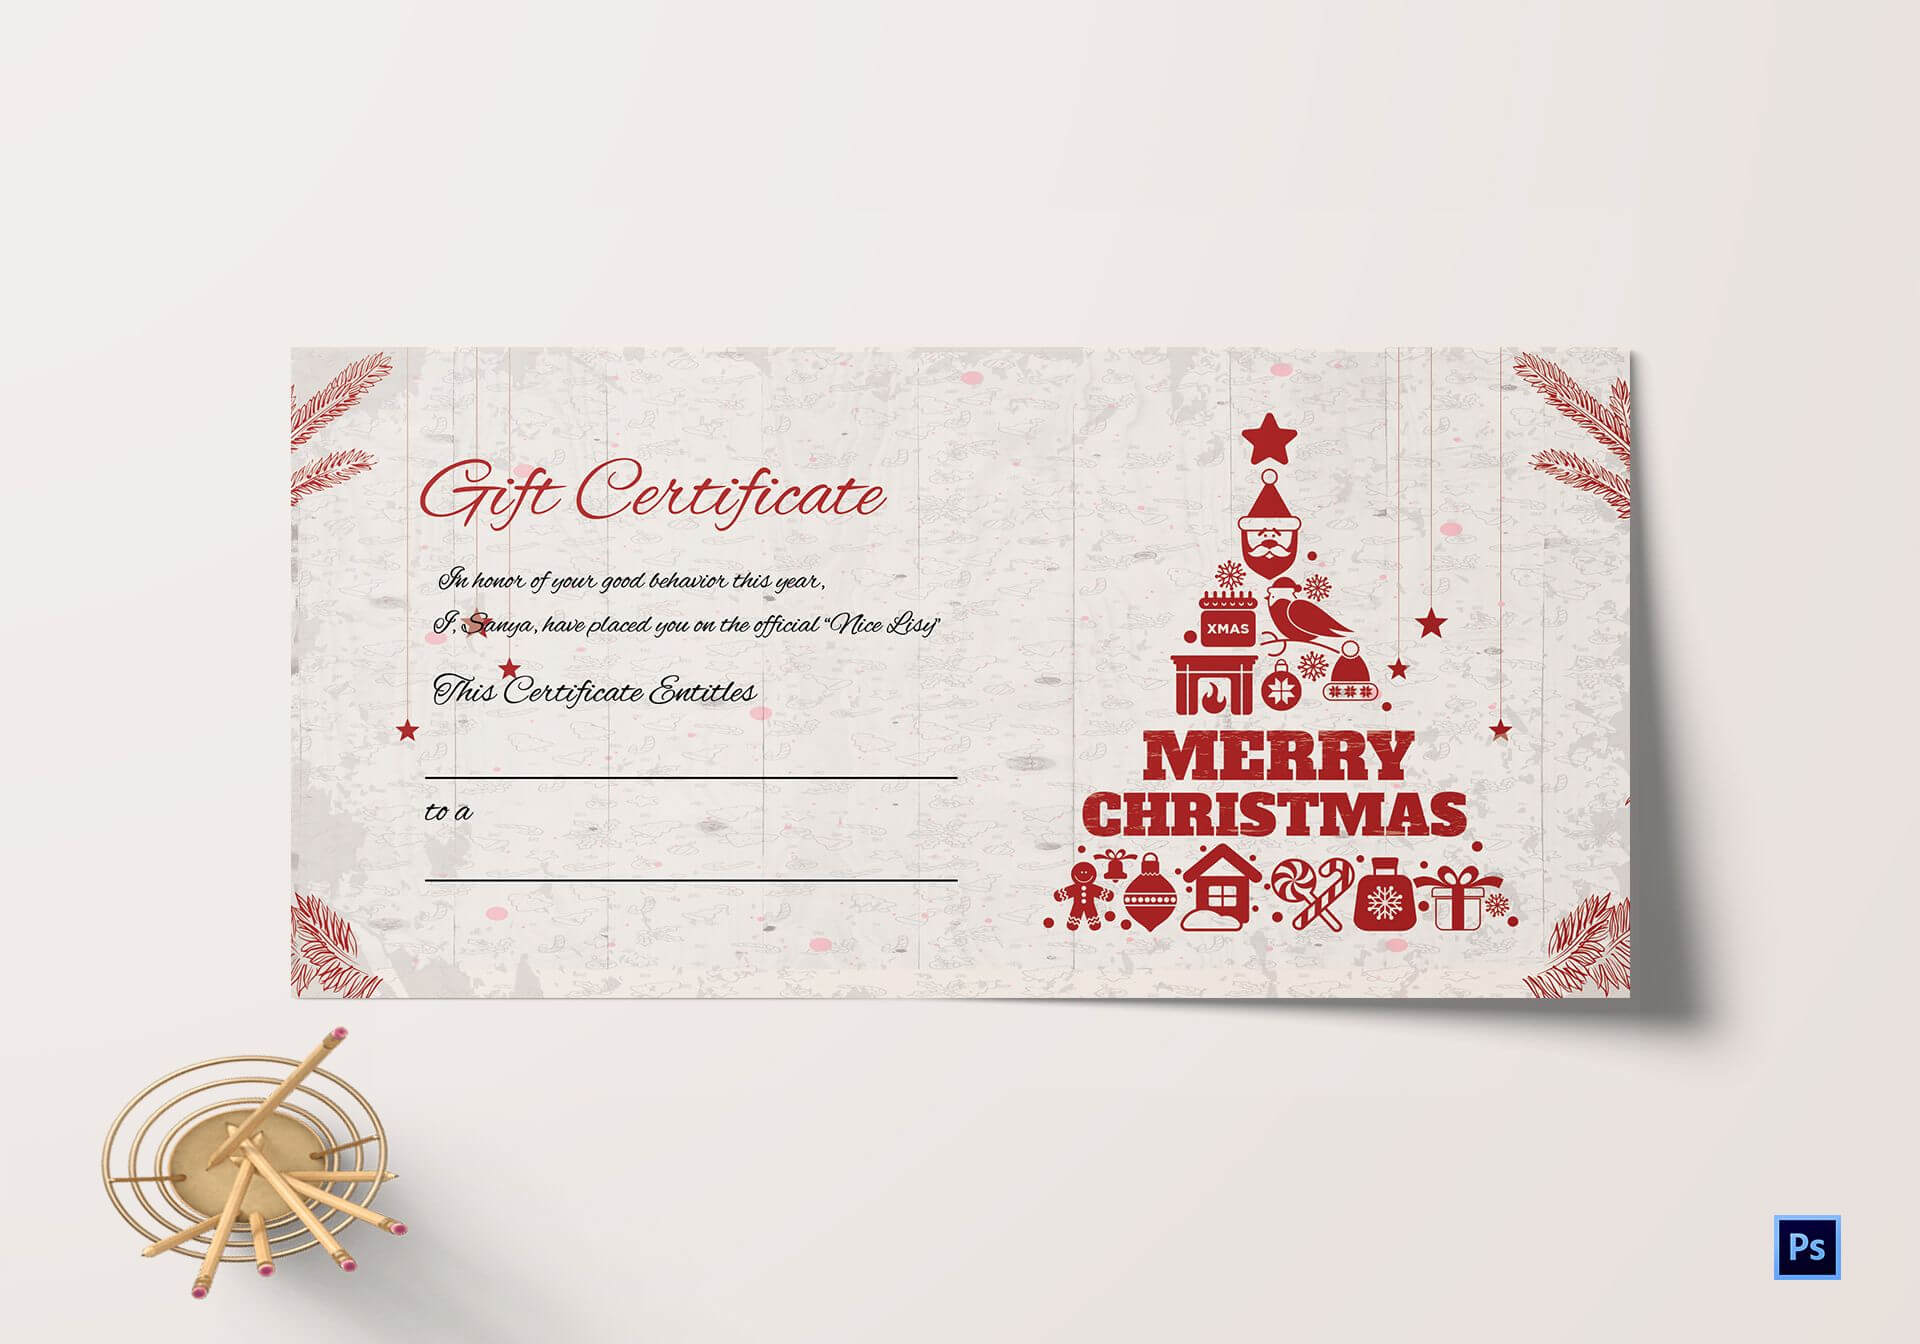 Christmas Gift Certificate Template | Printablepedia Throughout Merry Christmas Gift Certificate Templates